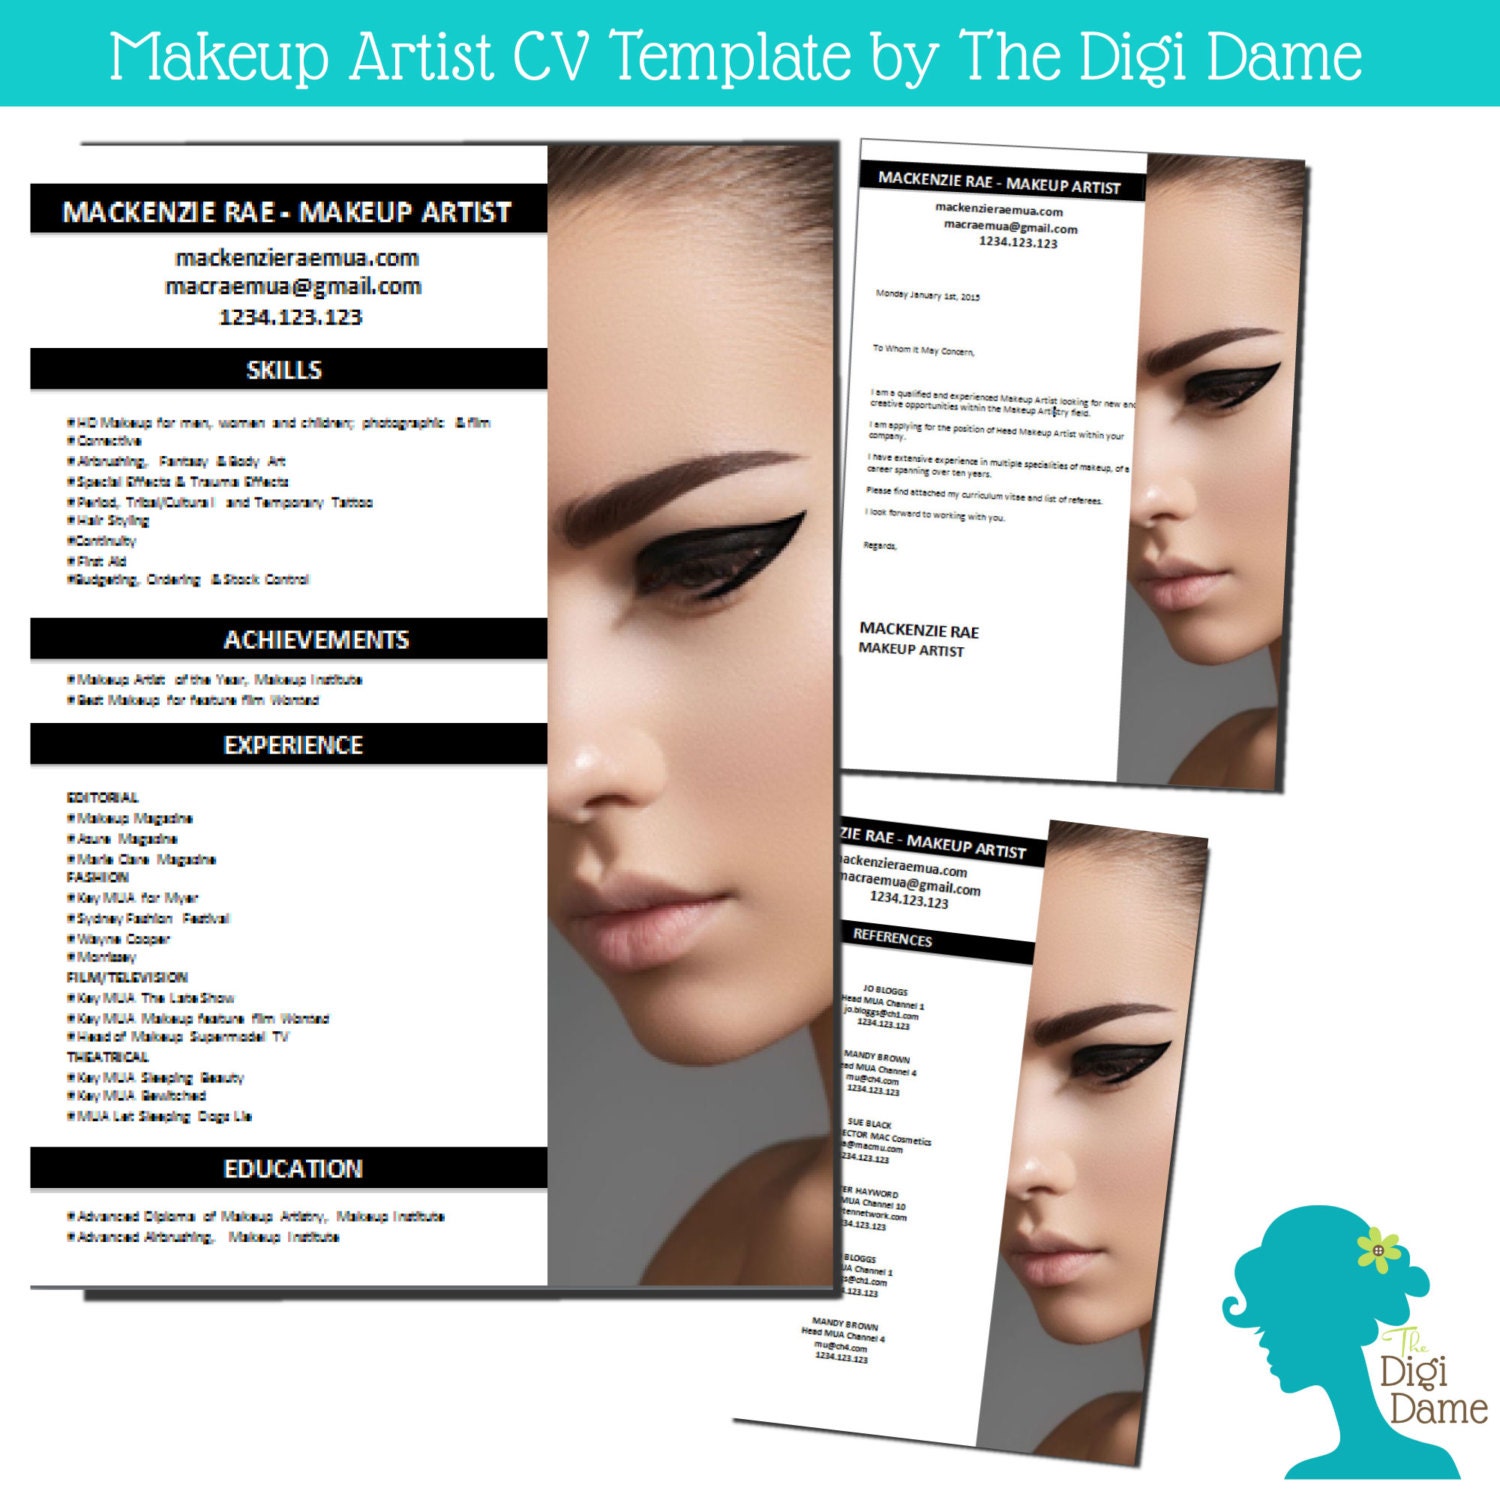 CV Template Package Makeup Artist. Includes a CV by digidame